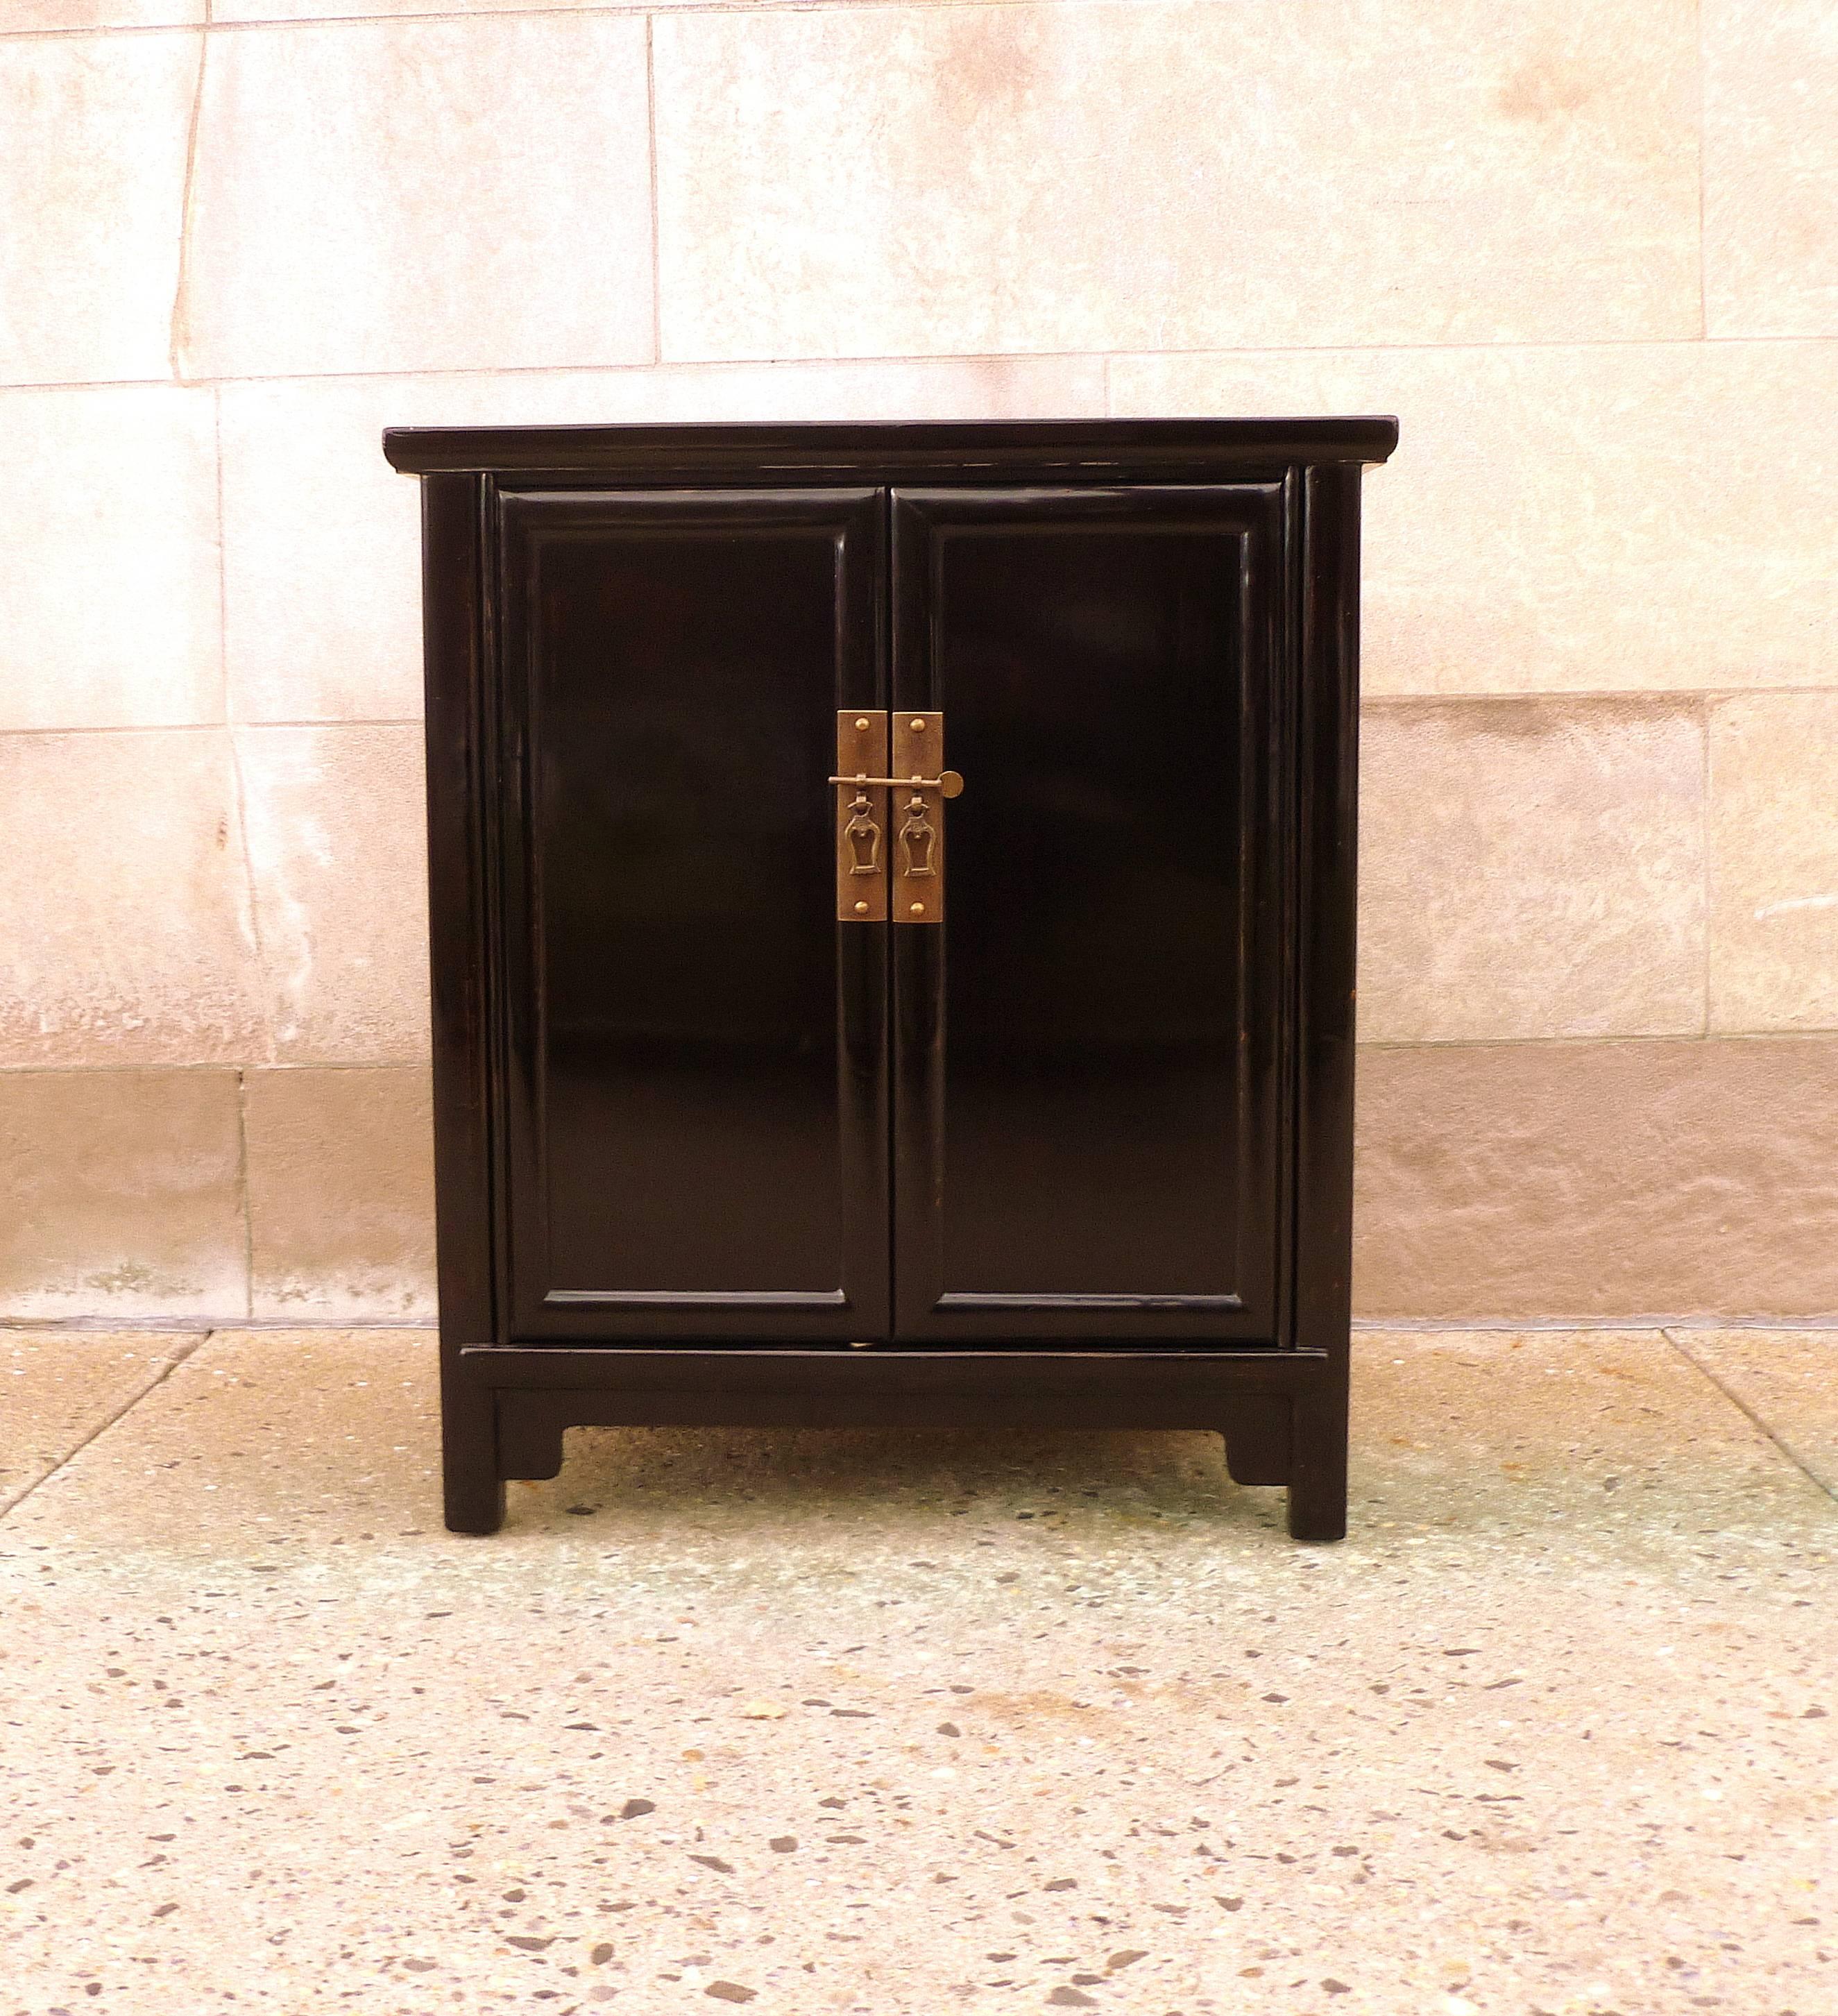 Fine black lacquer chest with pair of open doors and shelves inside. Elegant form and beautiful color.